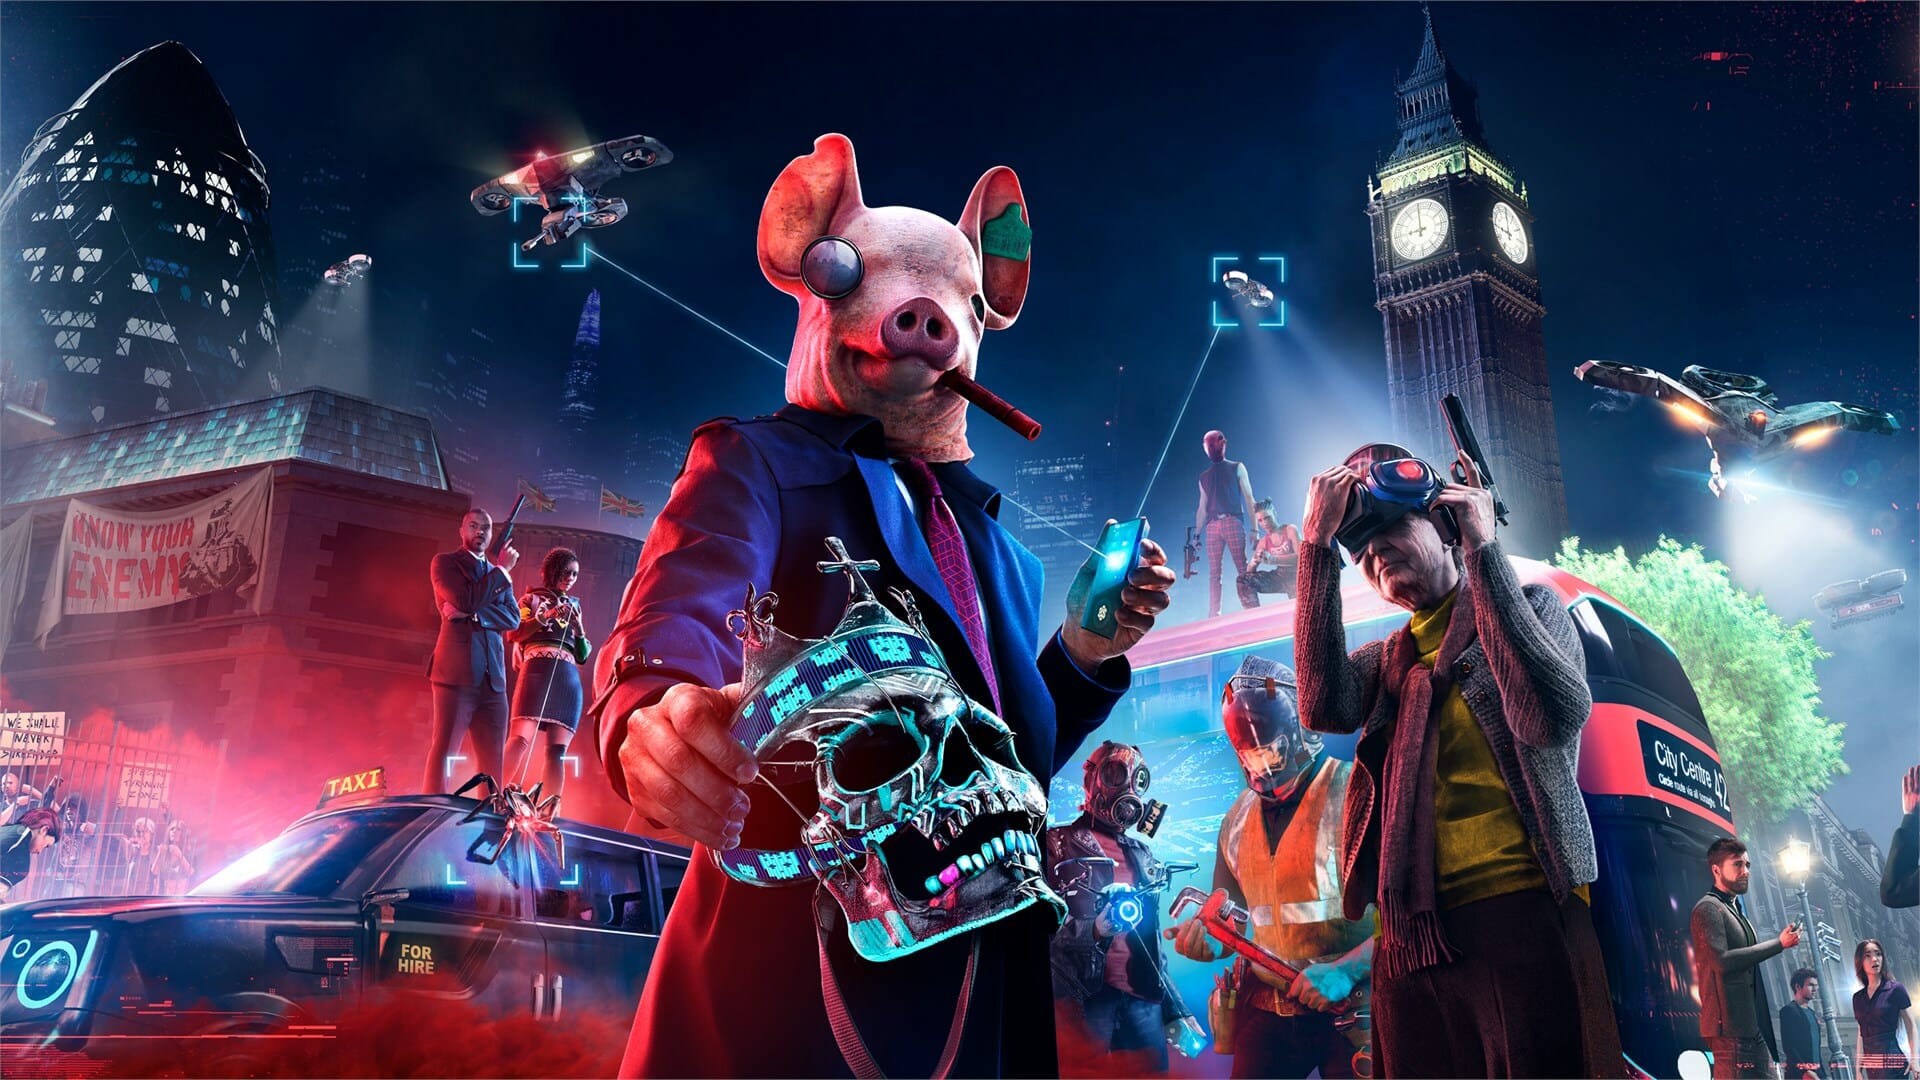 Watch Dogs: Legion review: A meaningless mob, with mostly merry mayhem